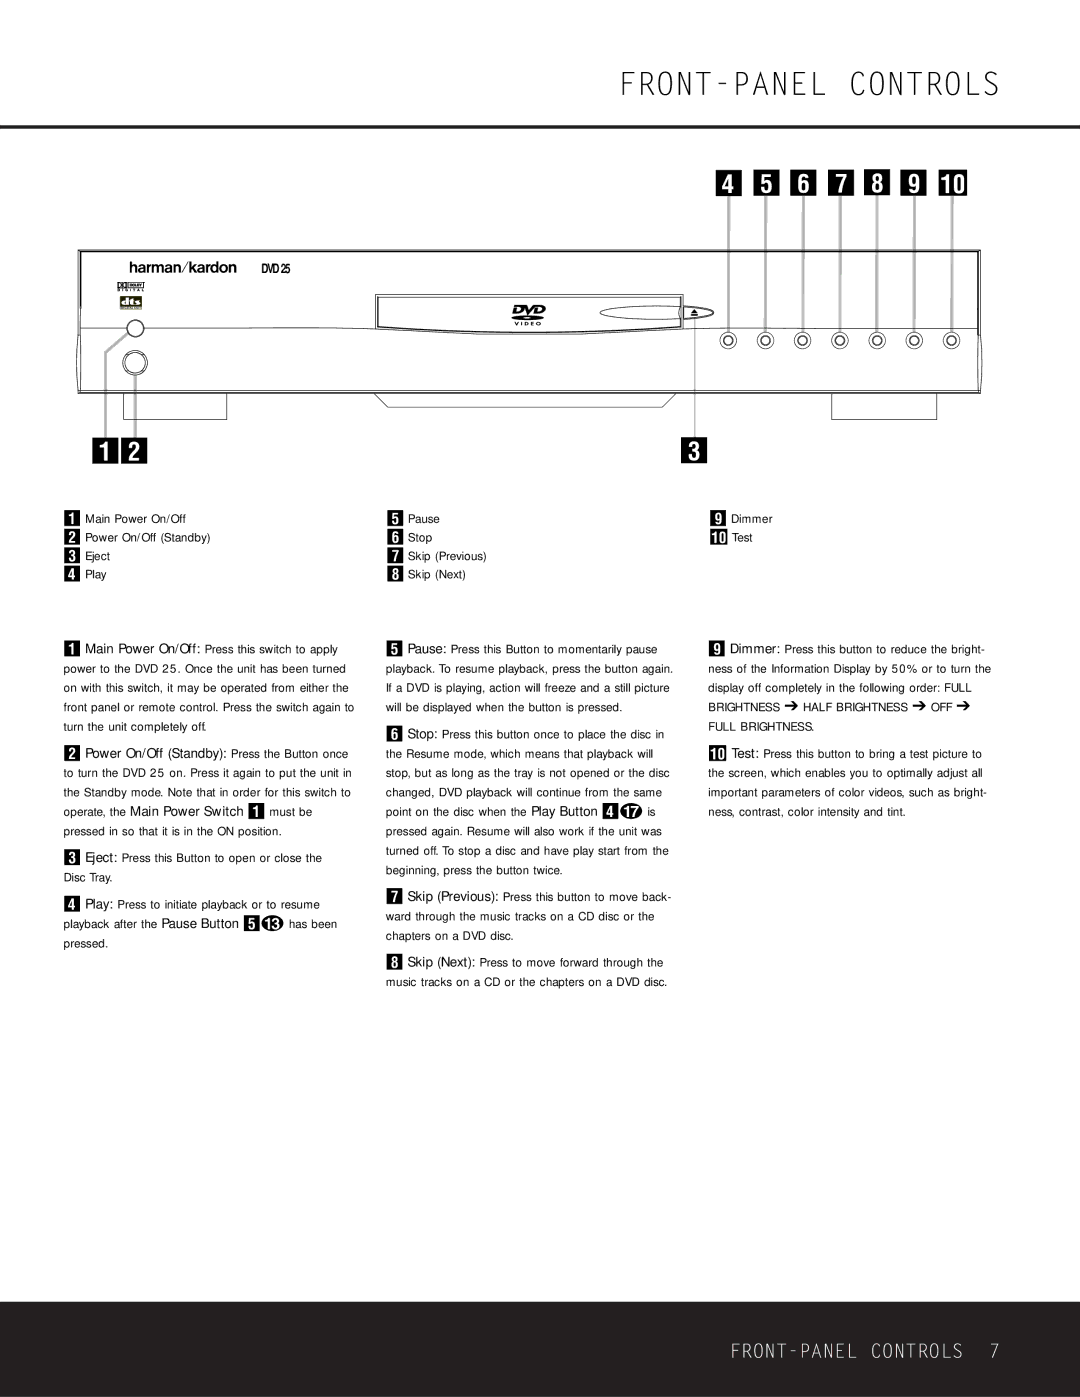 Harman-Kardon DVD 25 owner manual FRONT-PANEL Controls, Main Power On/Off Power On/Off Standby Eject Play, Dimmer Test 